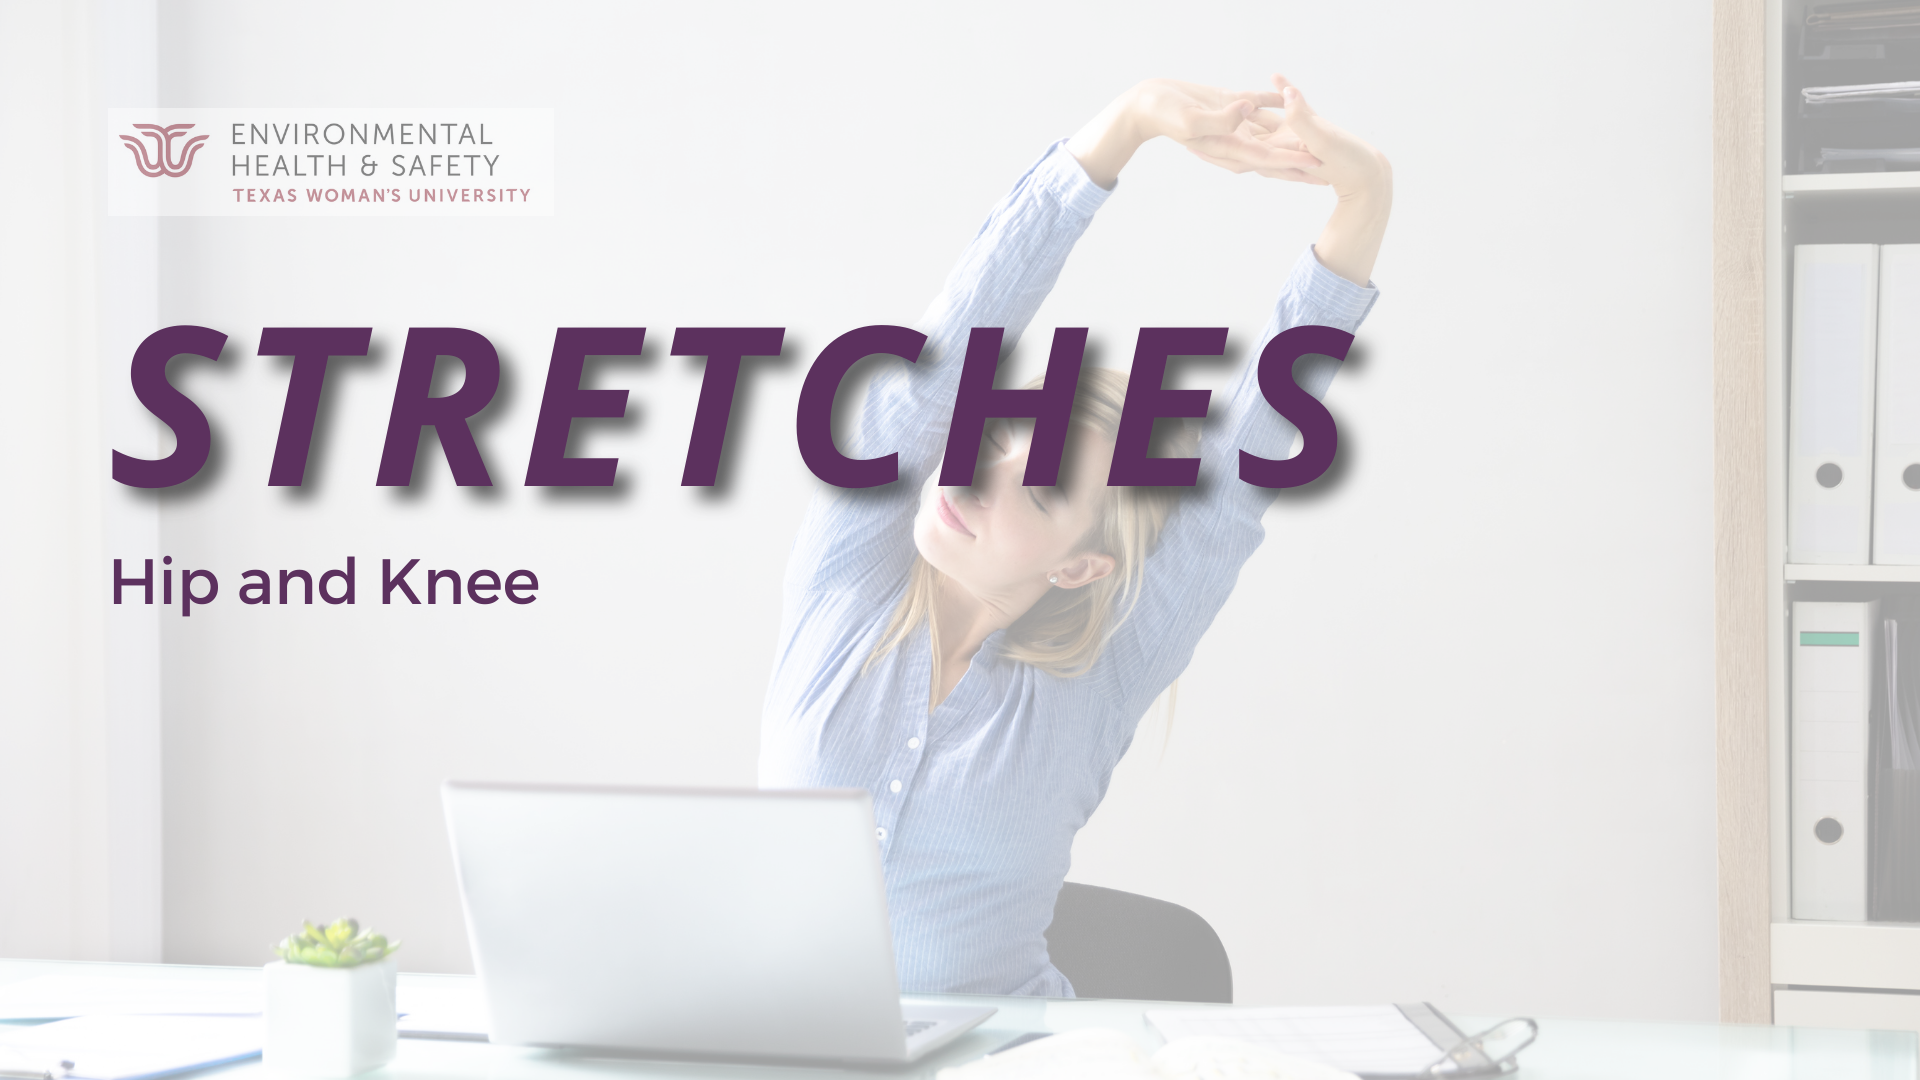 Background is a photo of a woman in a blue shirt sitting at a desk with a laptop and stretching with her arms overhead. In the foreground is text that says "Stretches: Hip and Knee" and has the TWU Environmental Health and Safety logo